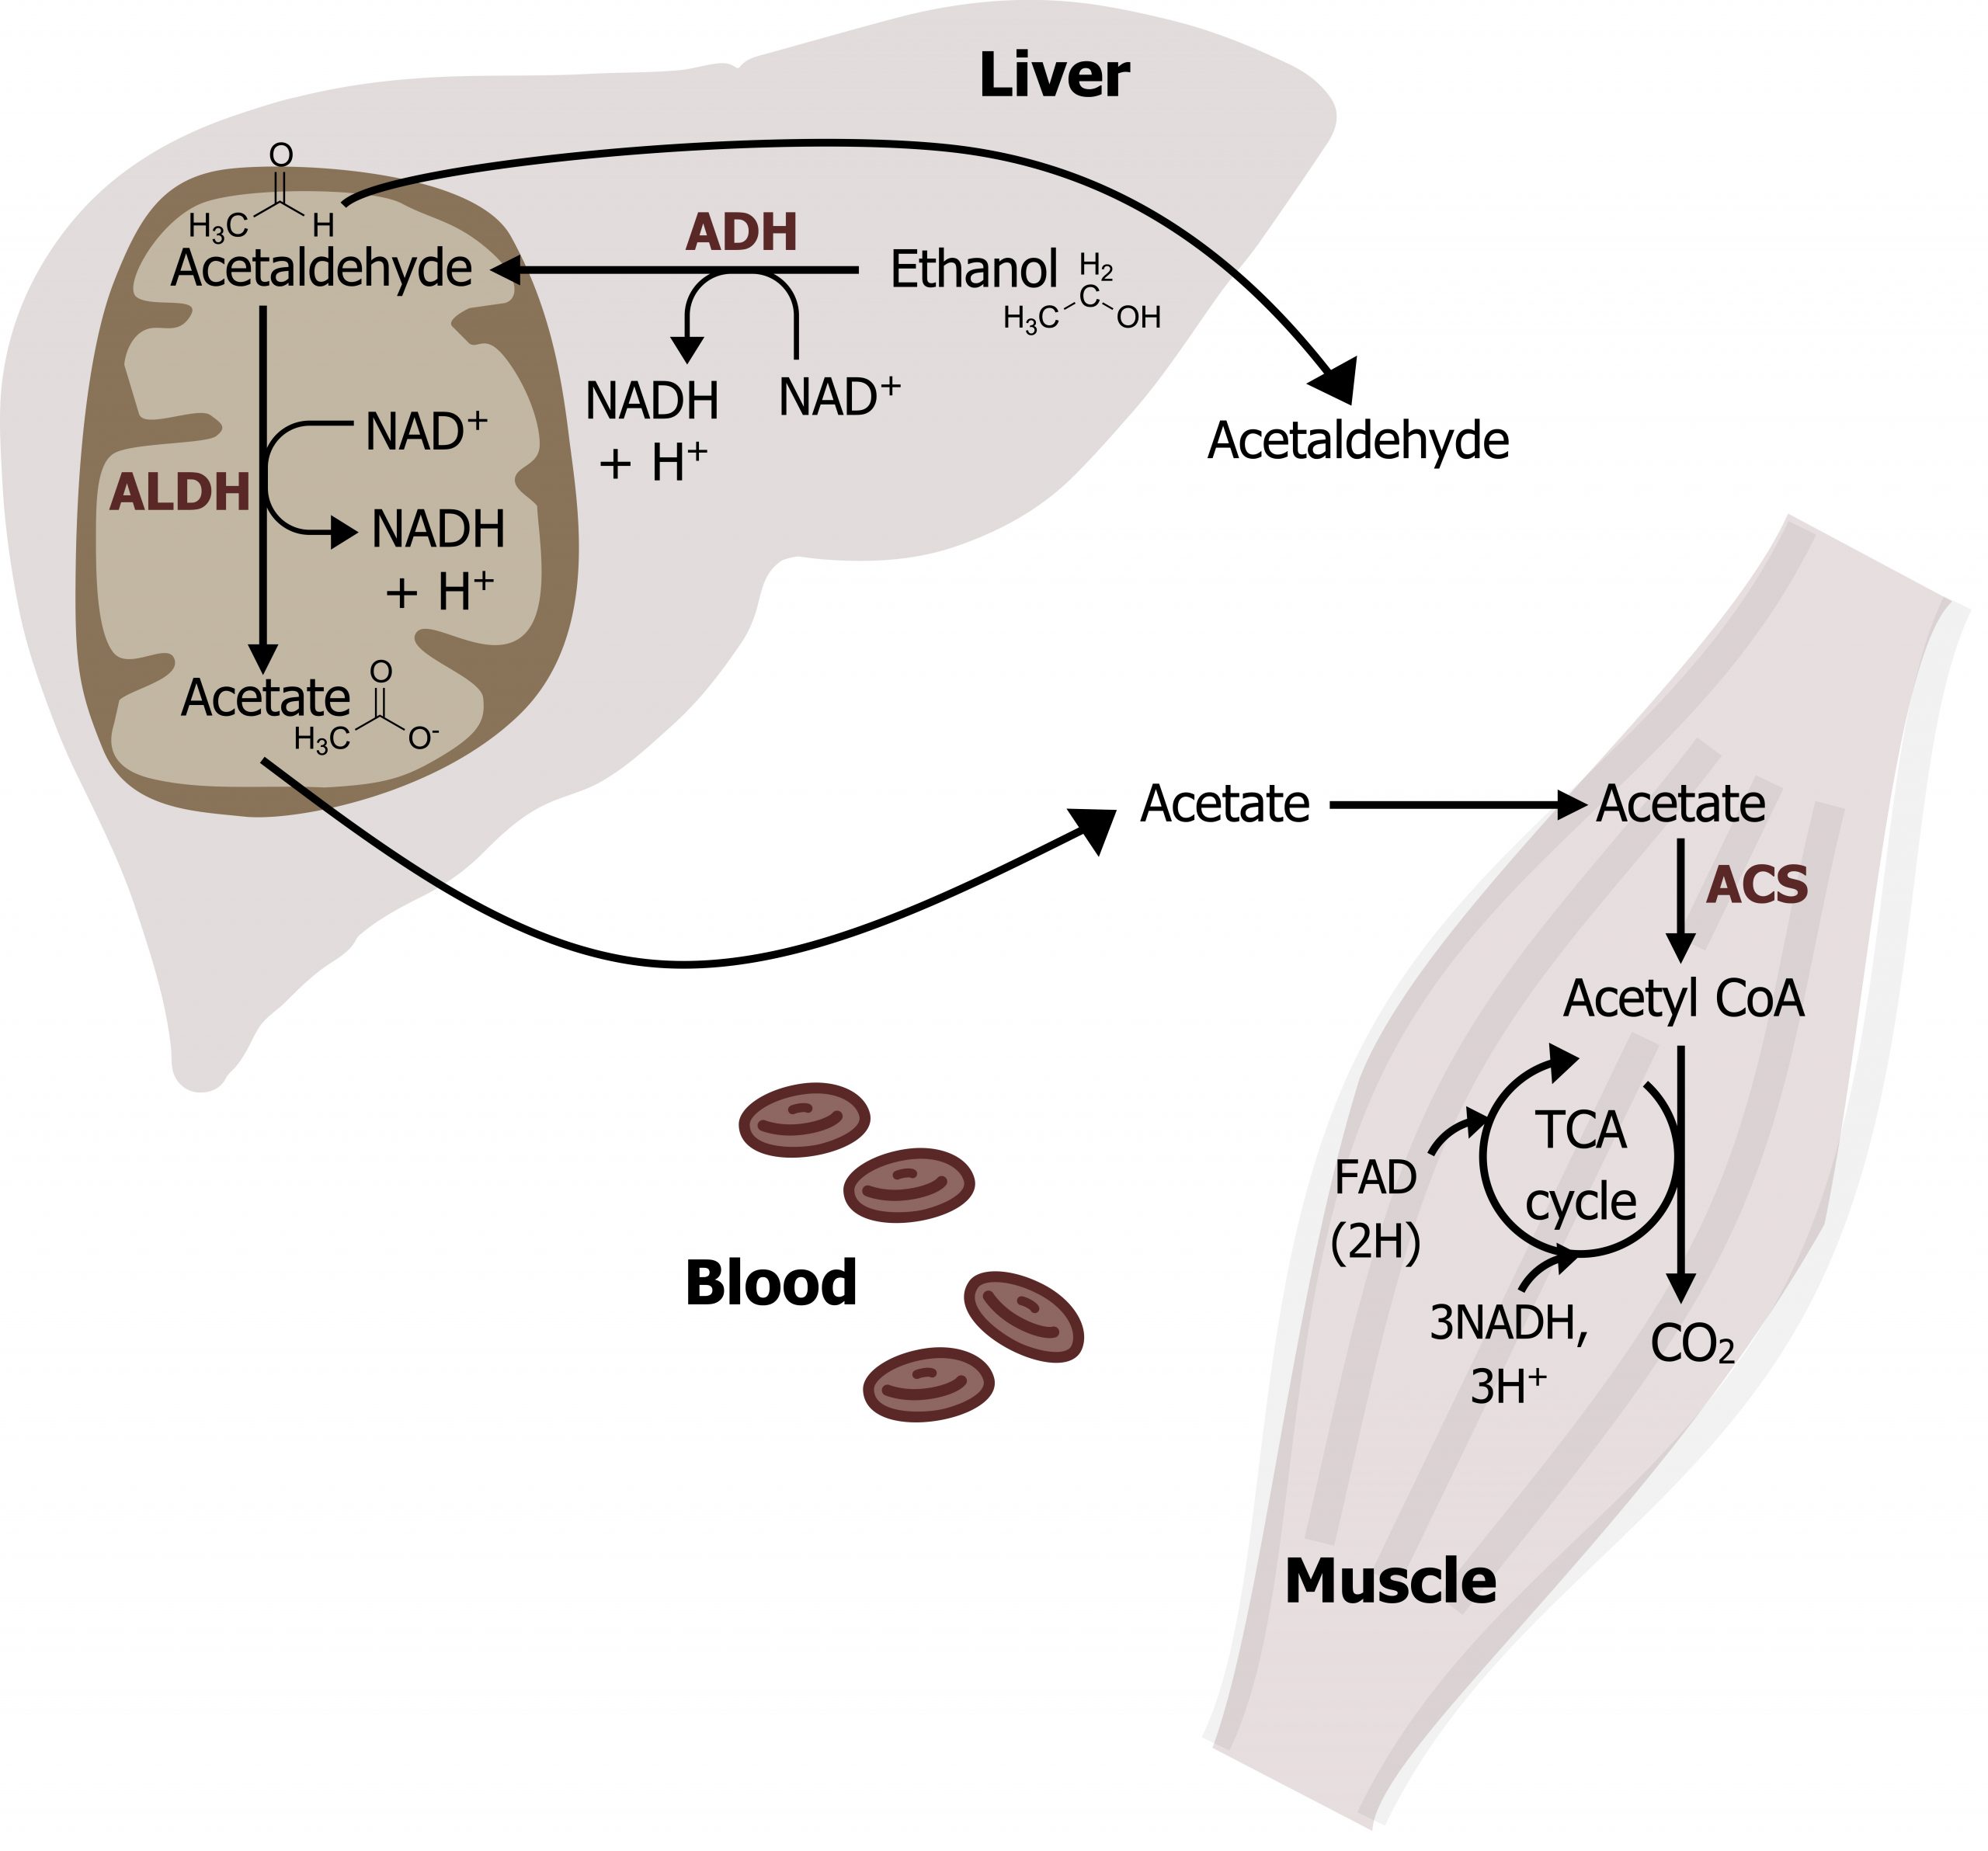 In the liver, ethanol arrow with NAD+ arrow NADH + H+ and enzyme ADH to Acetaldehyde arrow with NAD+ arrow NADH + H+ with enzyme ALDH to acetate moves to blood to muscle arrow enzyme ACS acetyl CoA arrow with 3 NADH, 3H+ and FAD into TCA cycle to CO2. Acetaldehyde from the liver moves to blood.